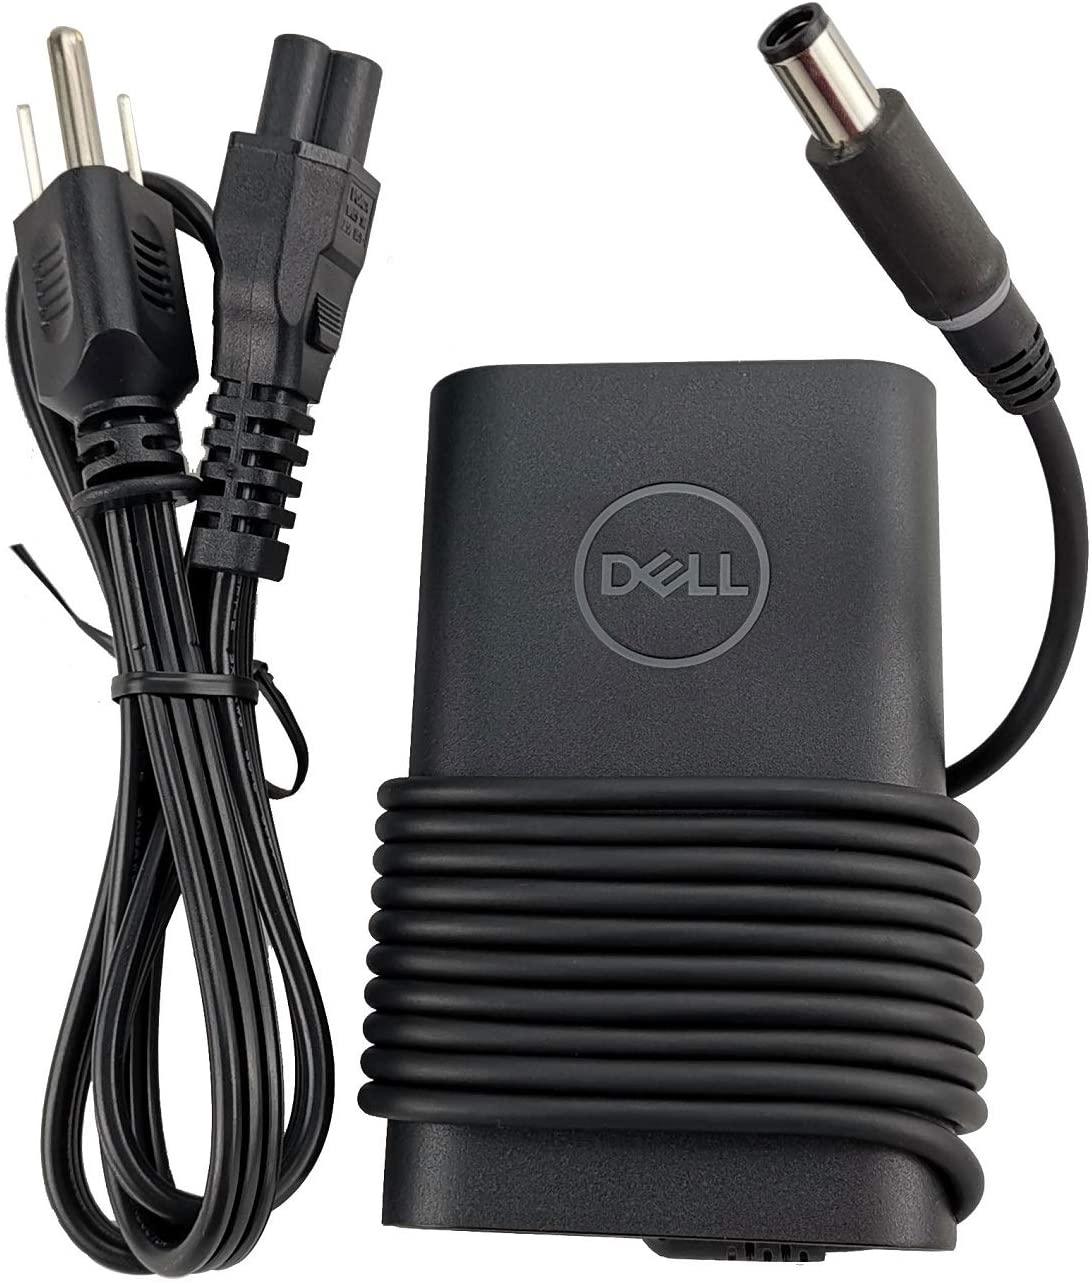 Dell Charger - Office Catch